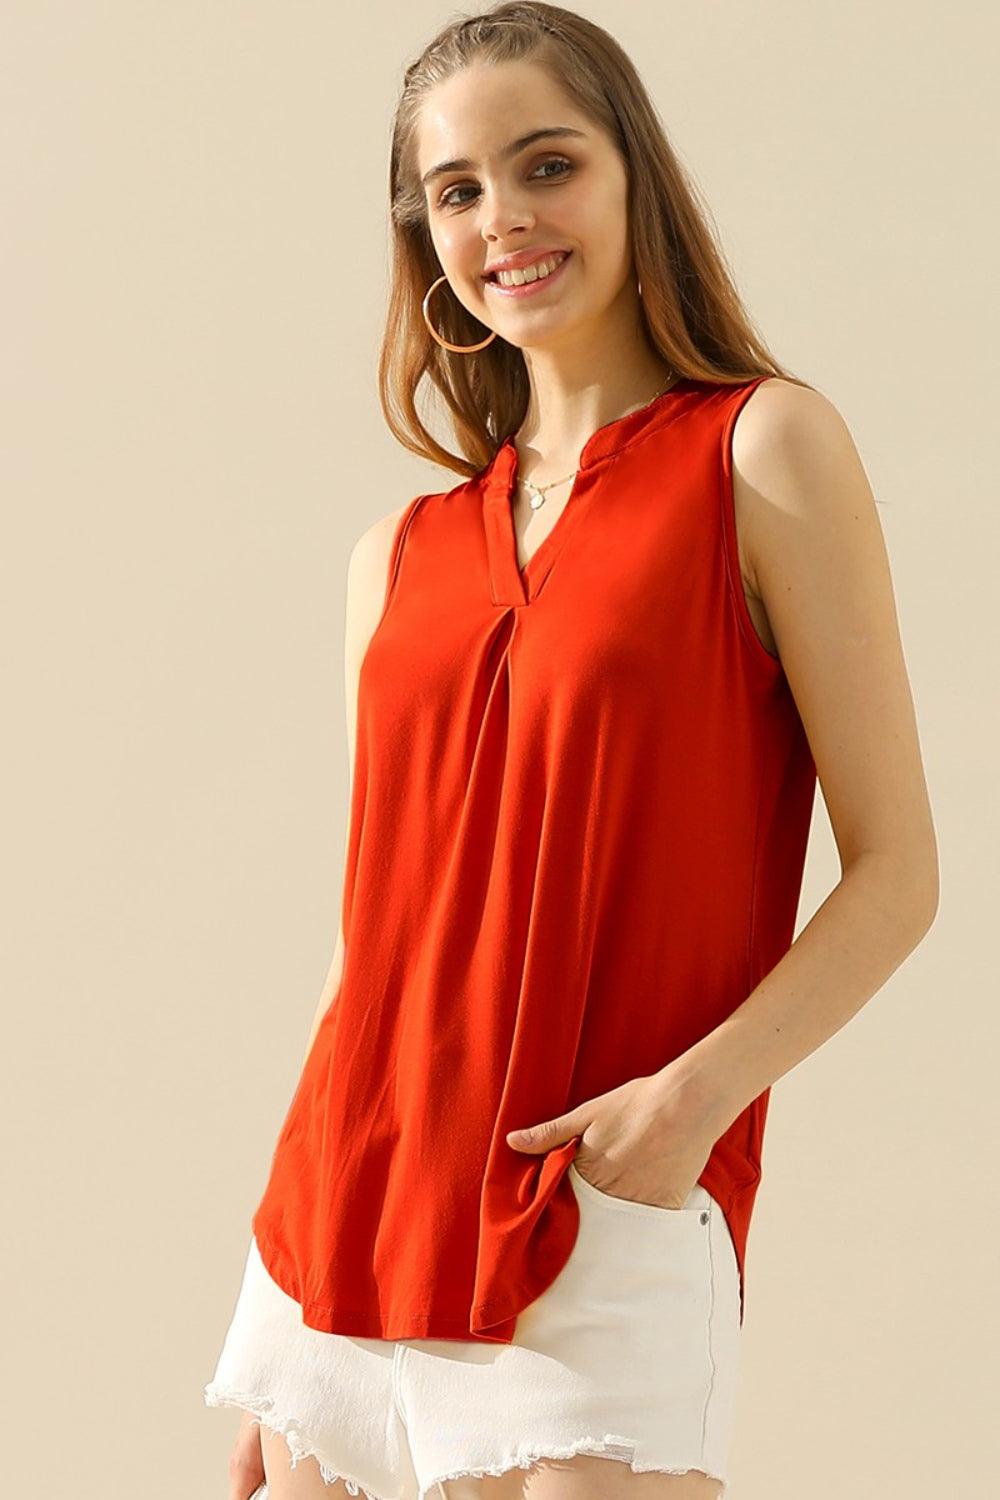 Ninexis Full Size Notched Sleeveless Top - AMIClubwear